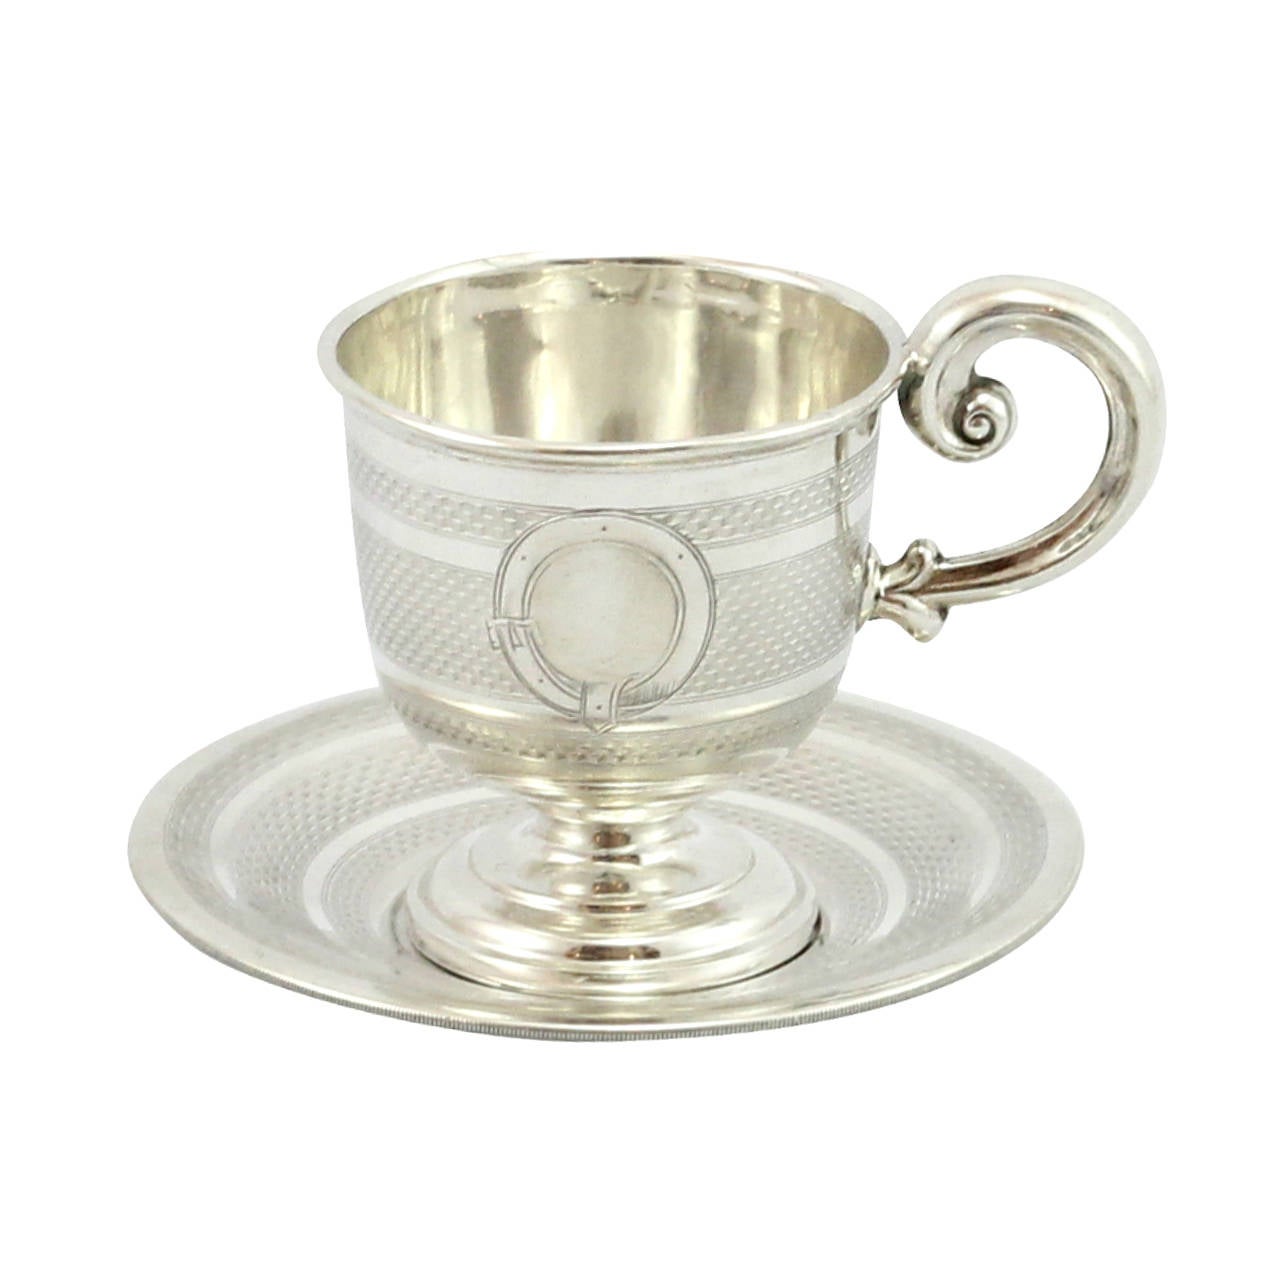 Set of Six .800 Silver Demitasse Cup and Saucers from Vienna, Austria.